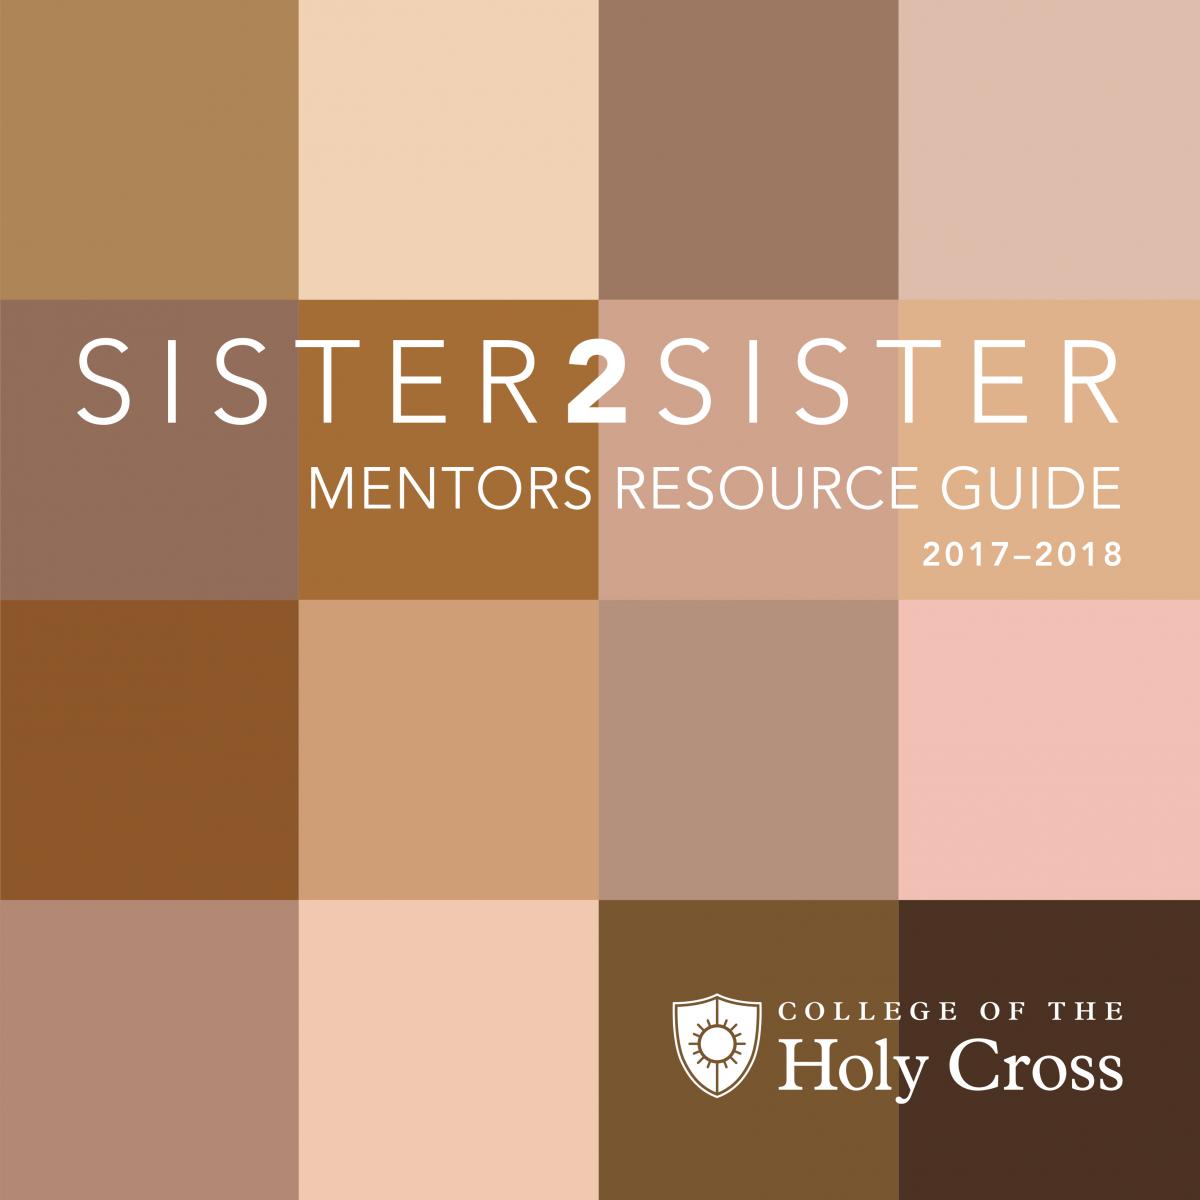 Sister 2 Sister | Mentors Resource Guide | 2017-2018 | College of the Holy Cross